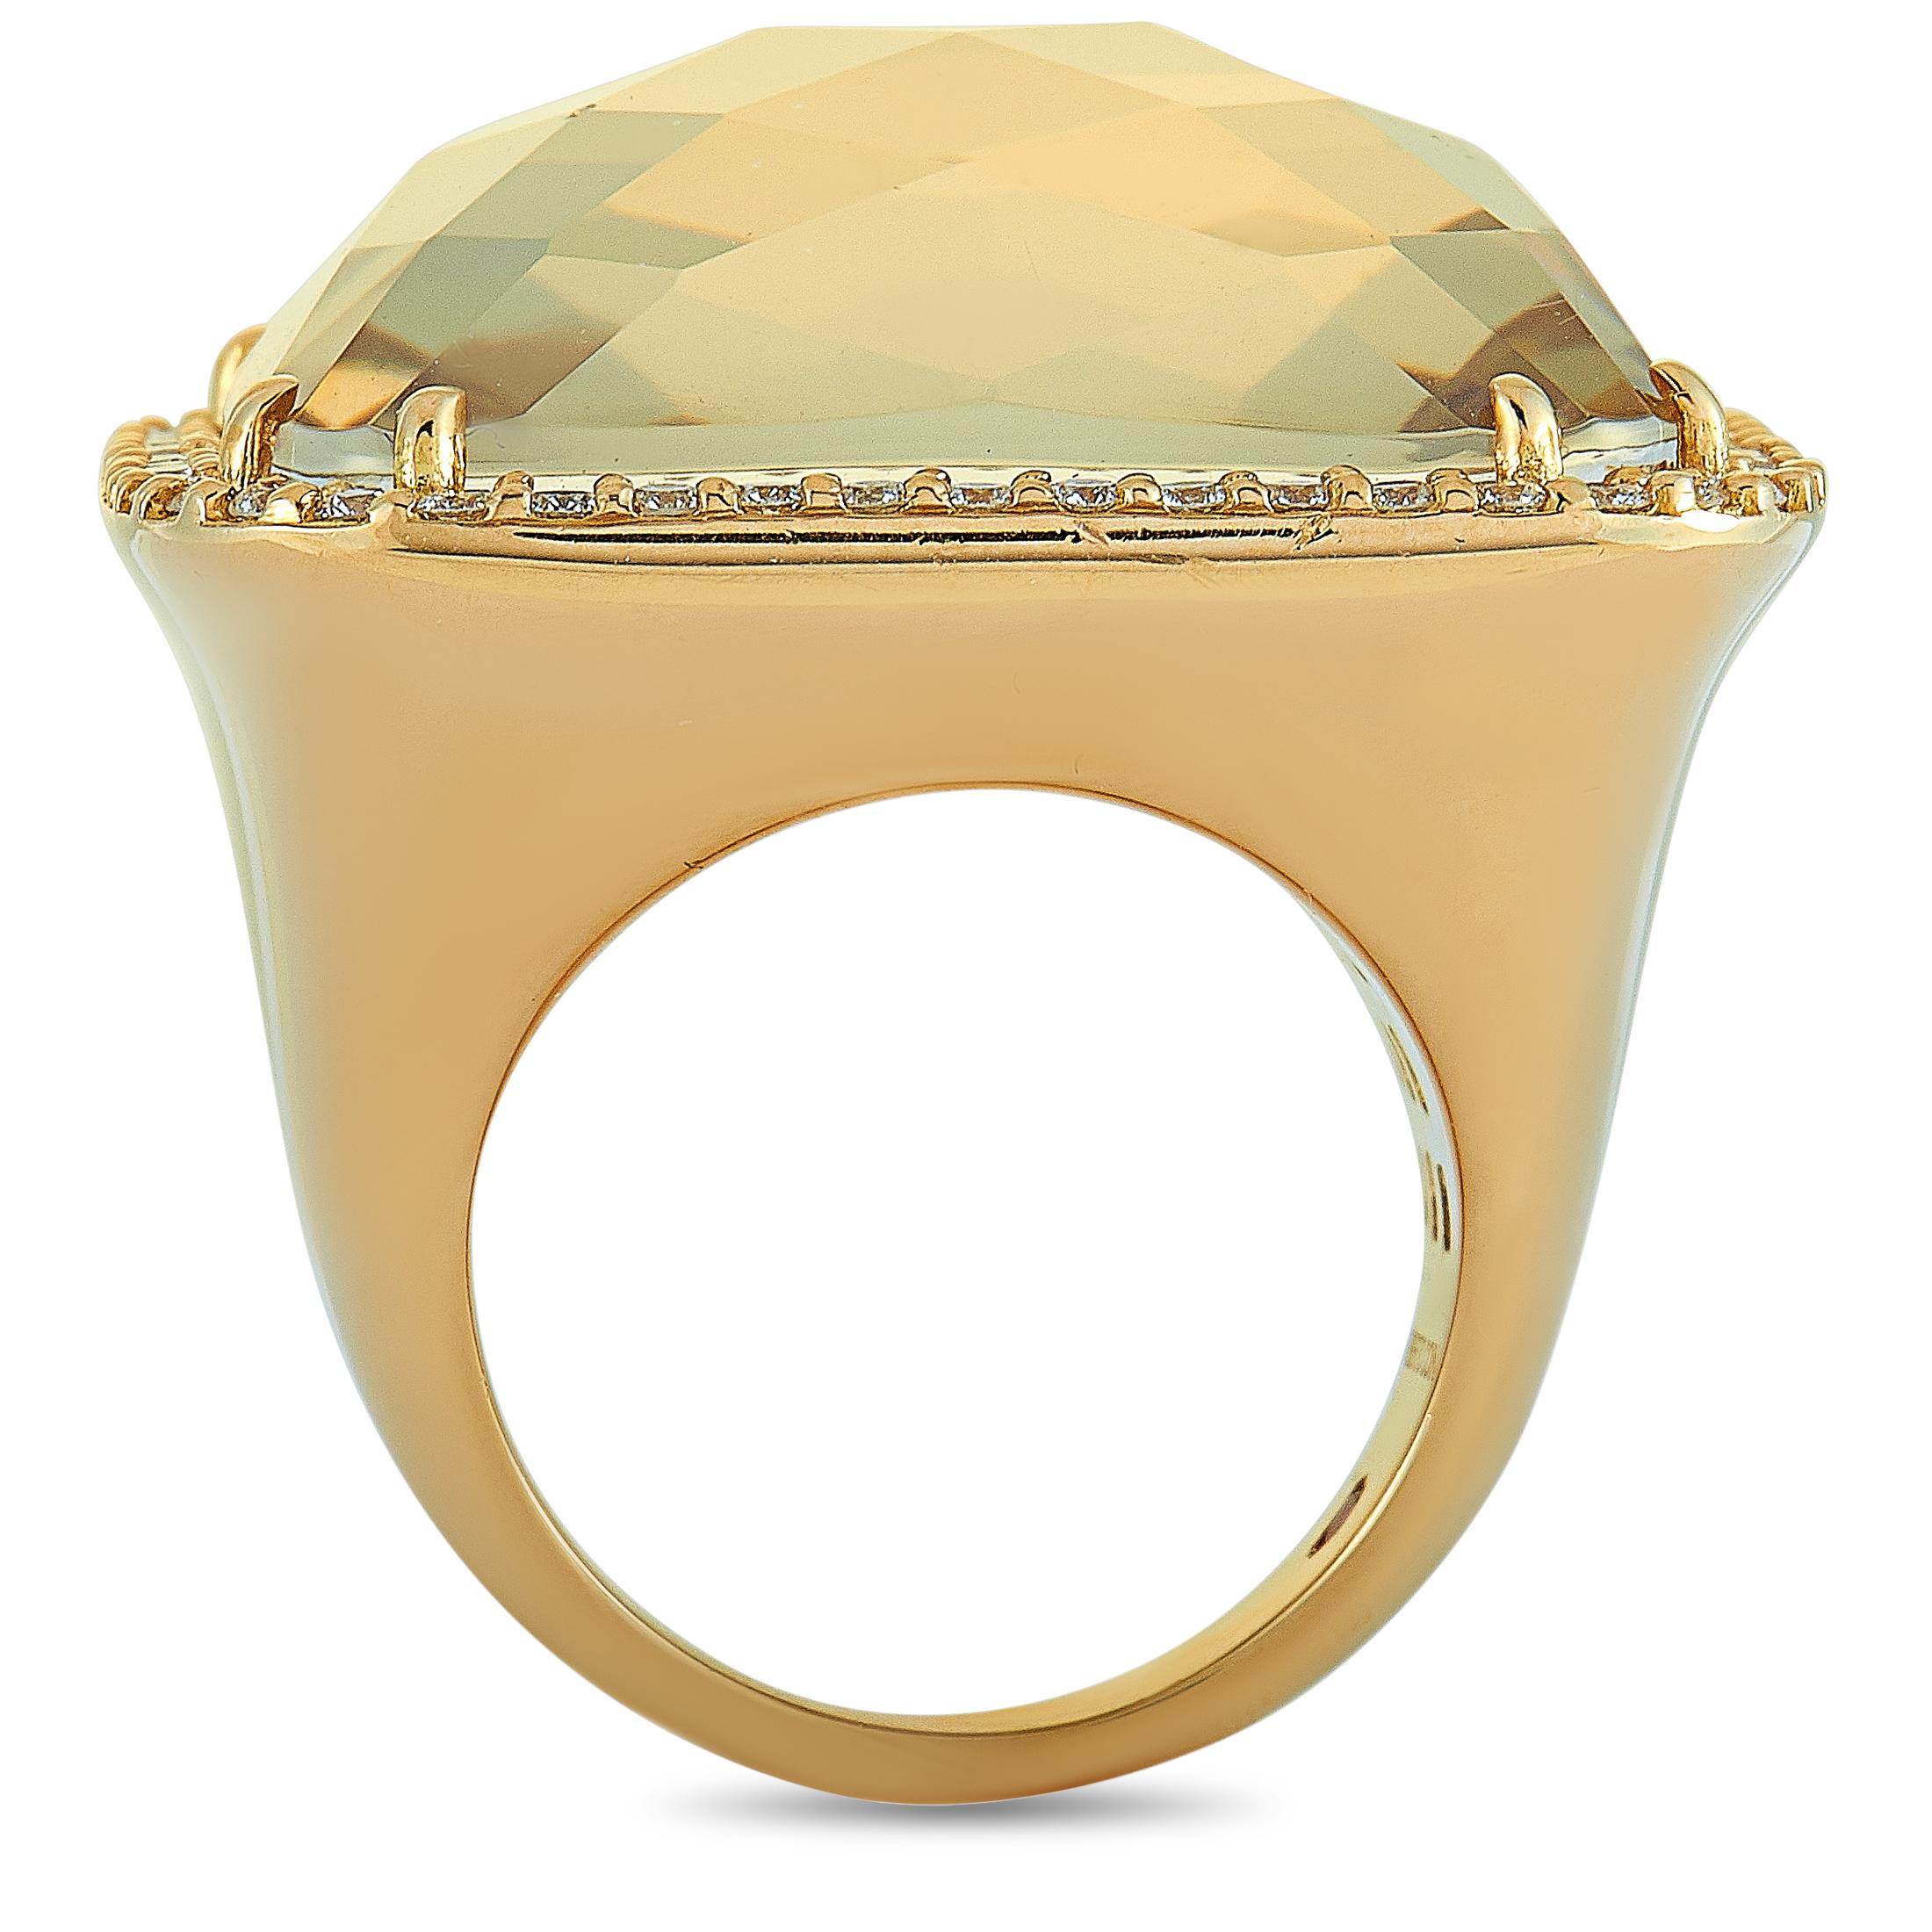 This Roberto Coin ring is crafted from 18K yellow gold and set with a smoky quartz and a total of 1.25 carats of diamonds. The ring weighs 35 grams, boasting band thickness of 4 mm and top height of 14 mm, while top dimensions measure 30 by 30